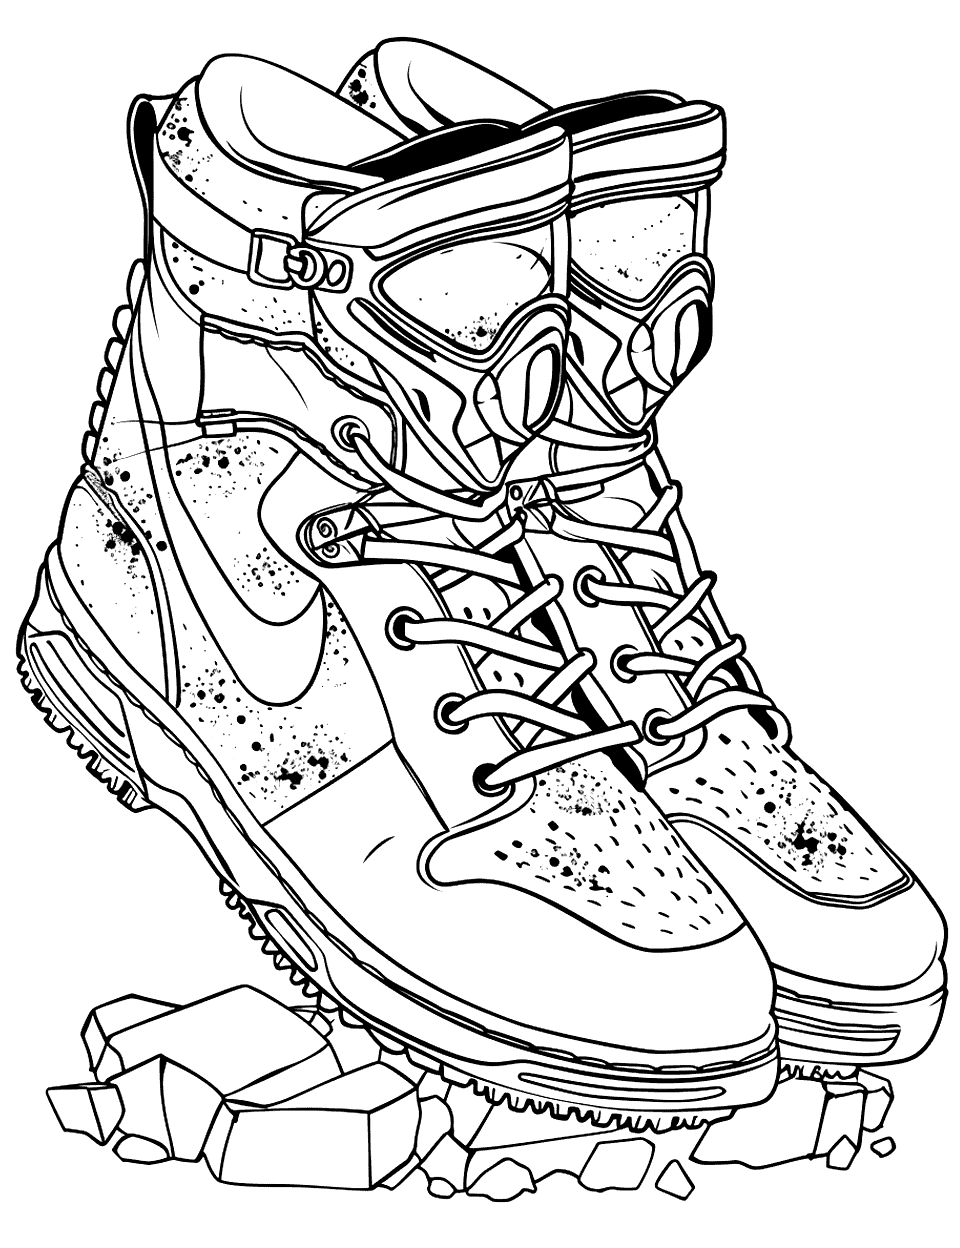 Paintball Boots in the Game Shoe Coloring Page - Paintball boots splattered with paint.